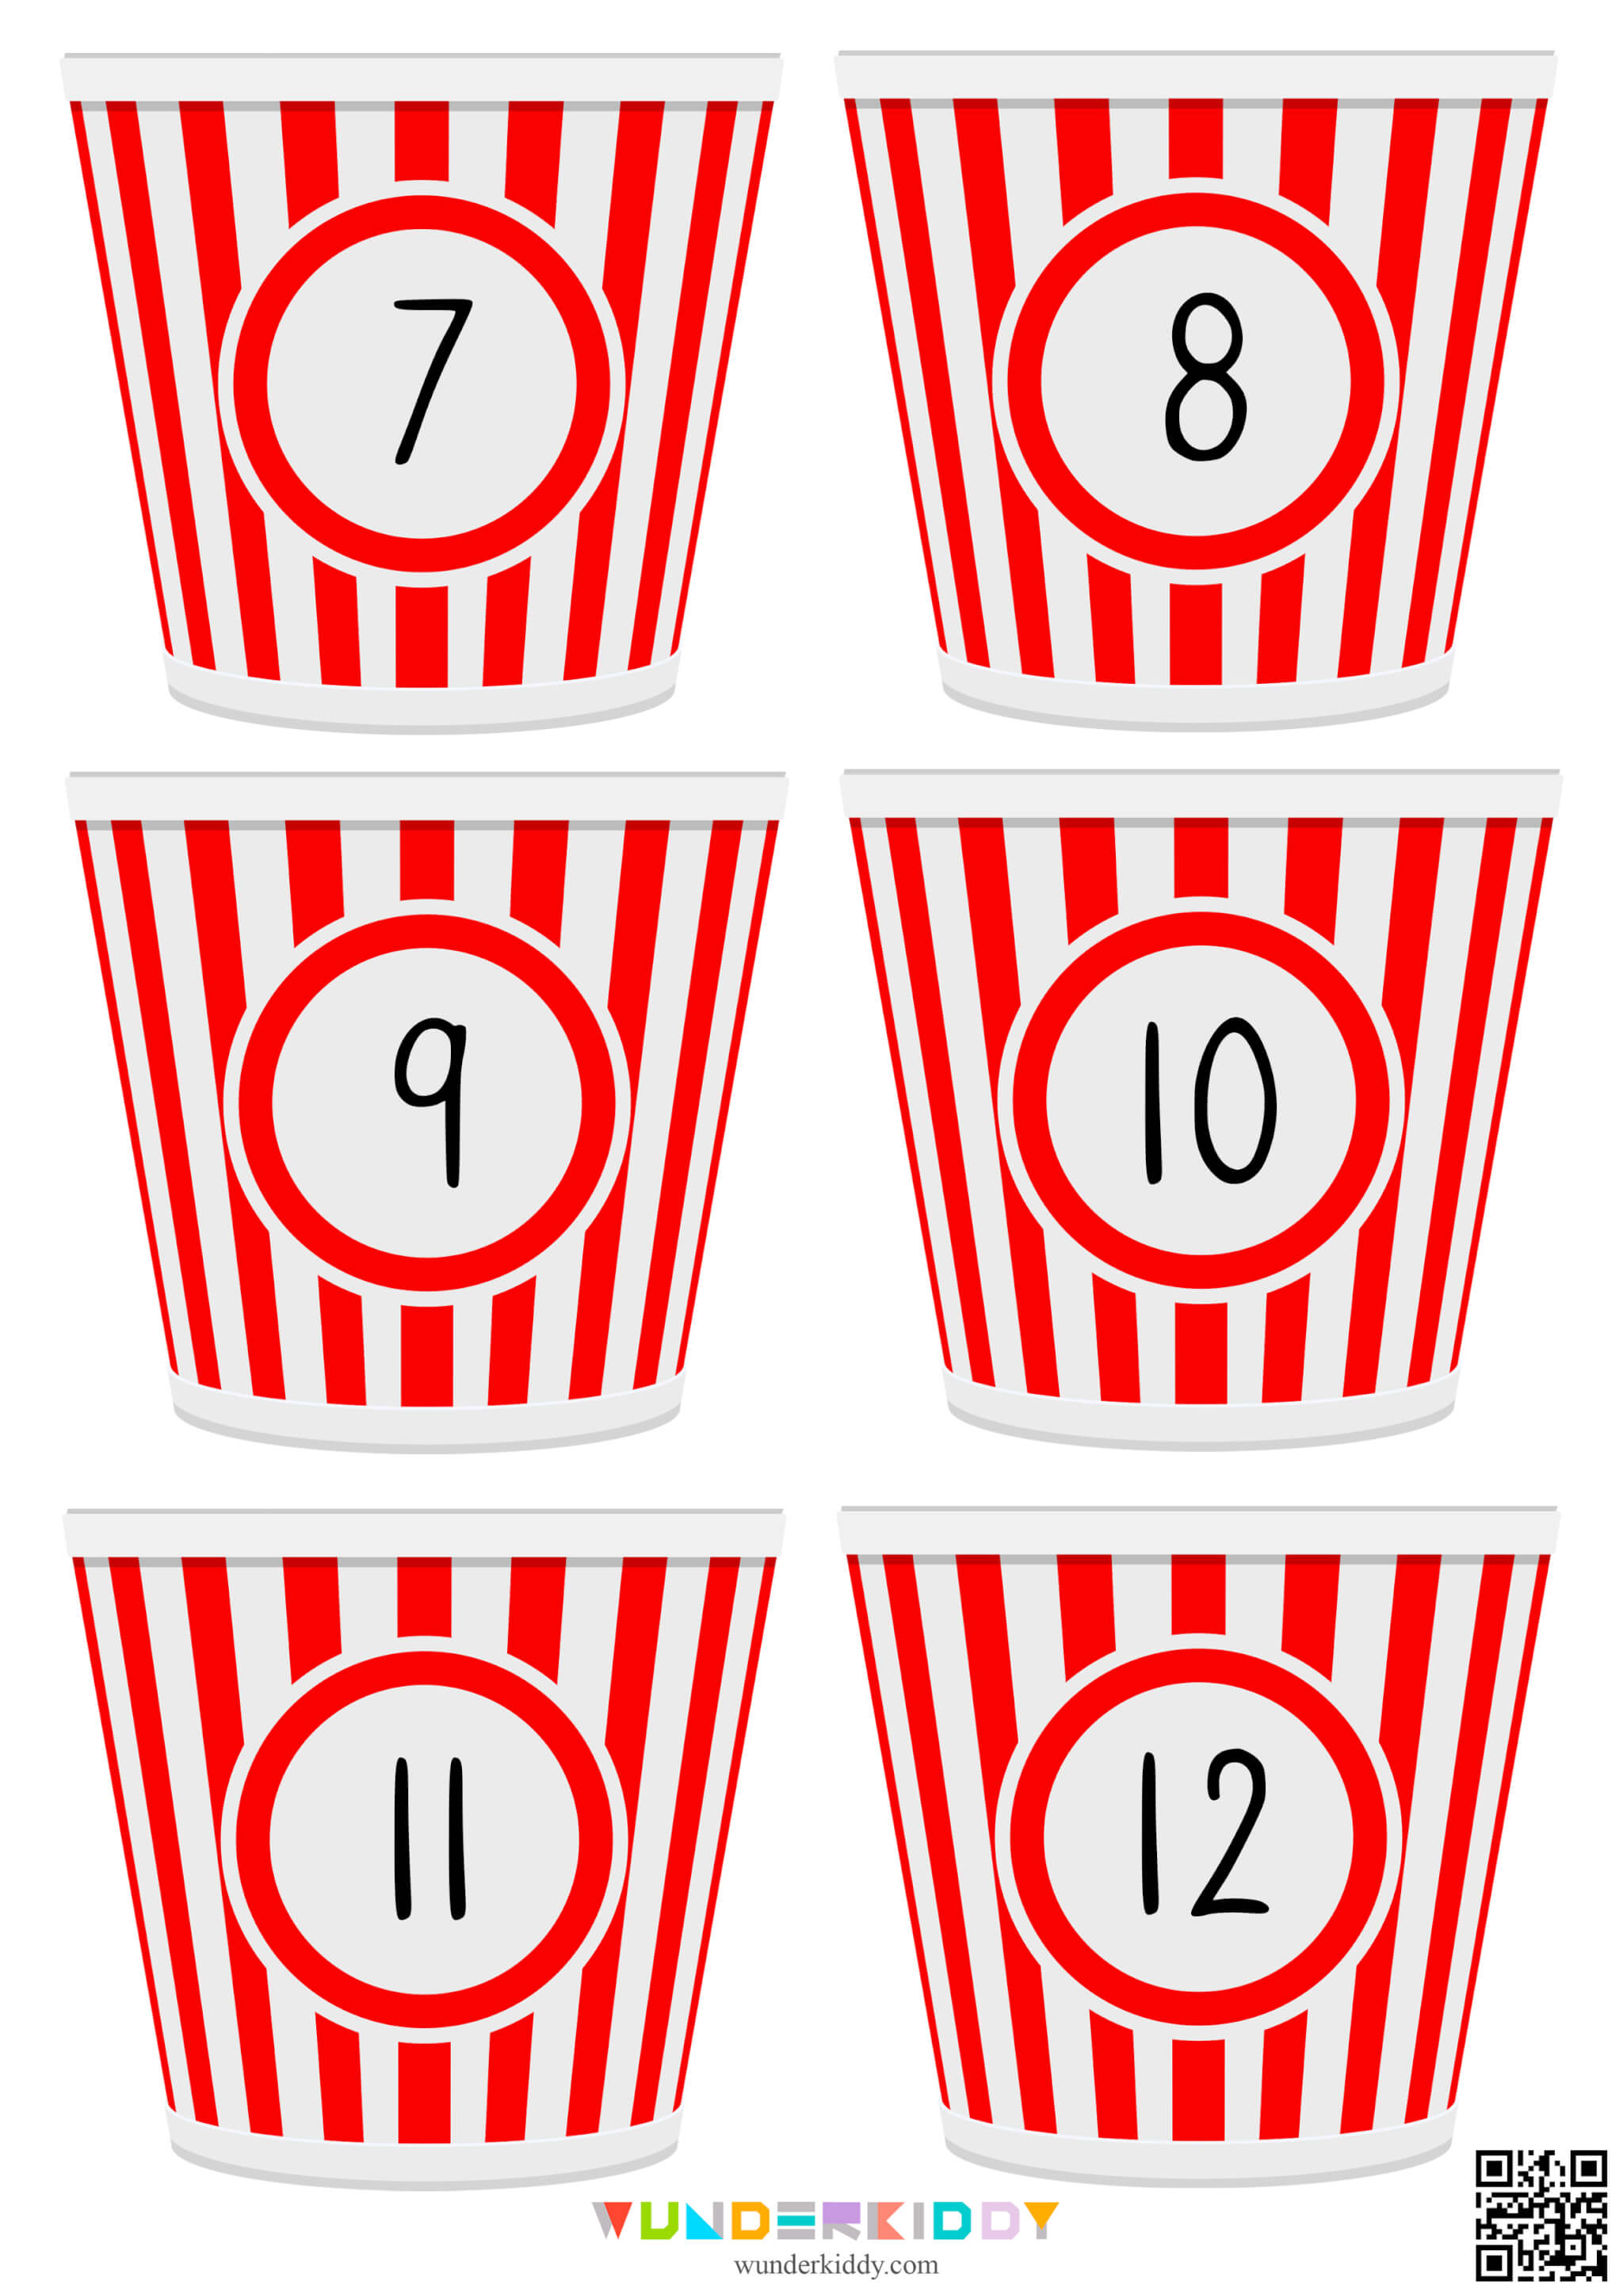 Popcorn Counting Cards - Image 3